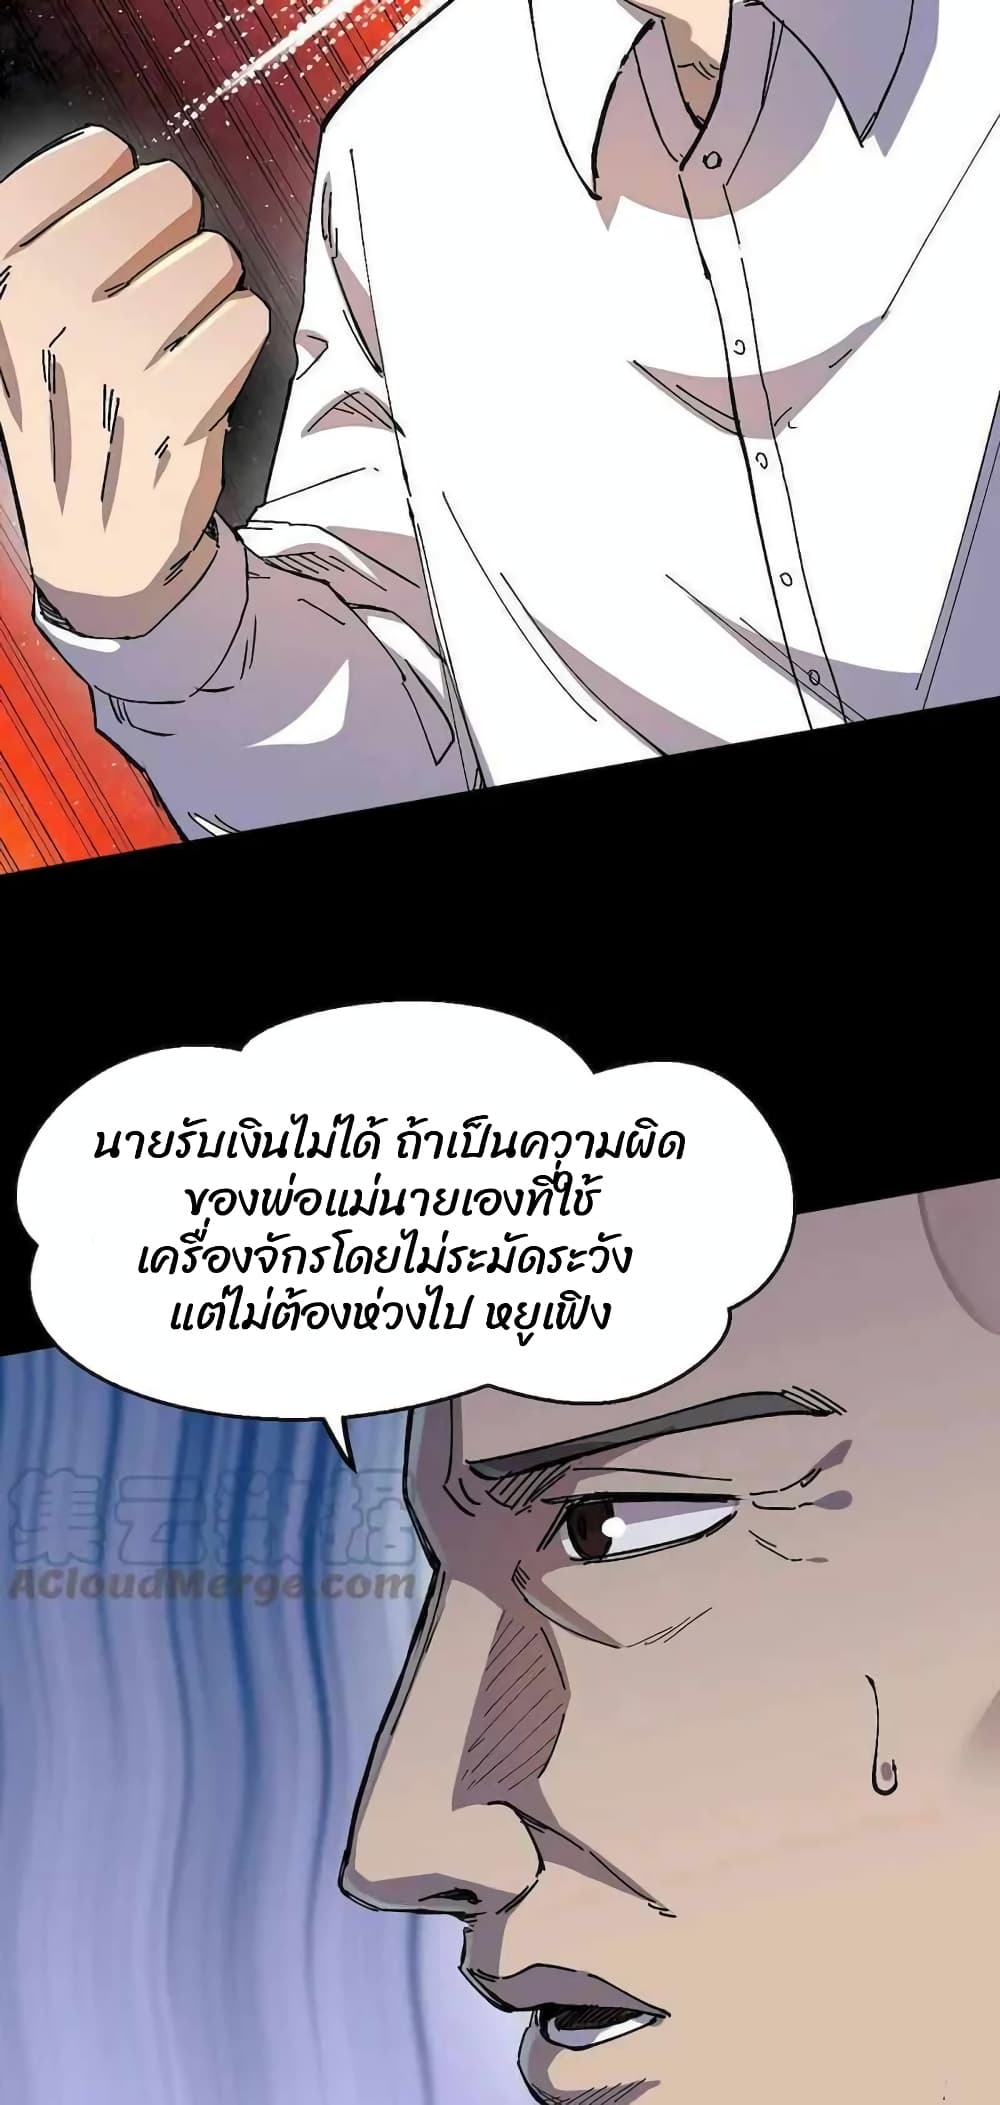 Rebirth Back to 1983 to Be a Millionaire ตอนที่ 2 (18)